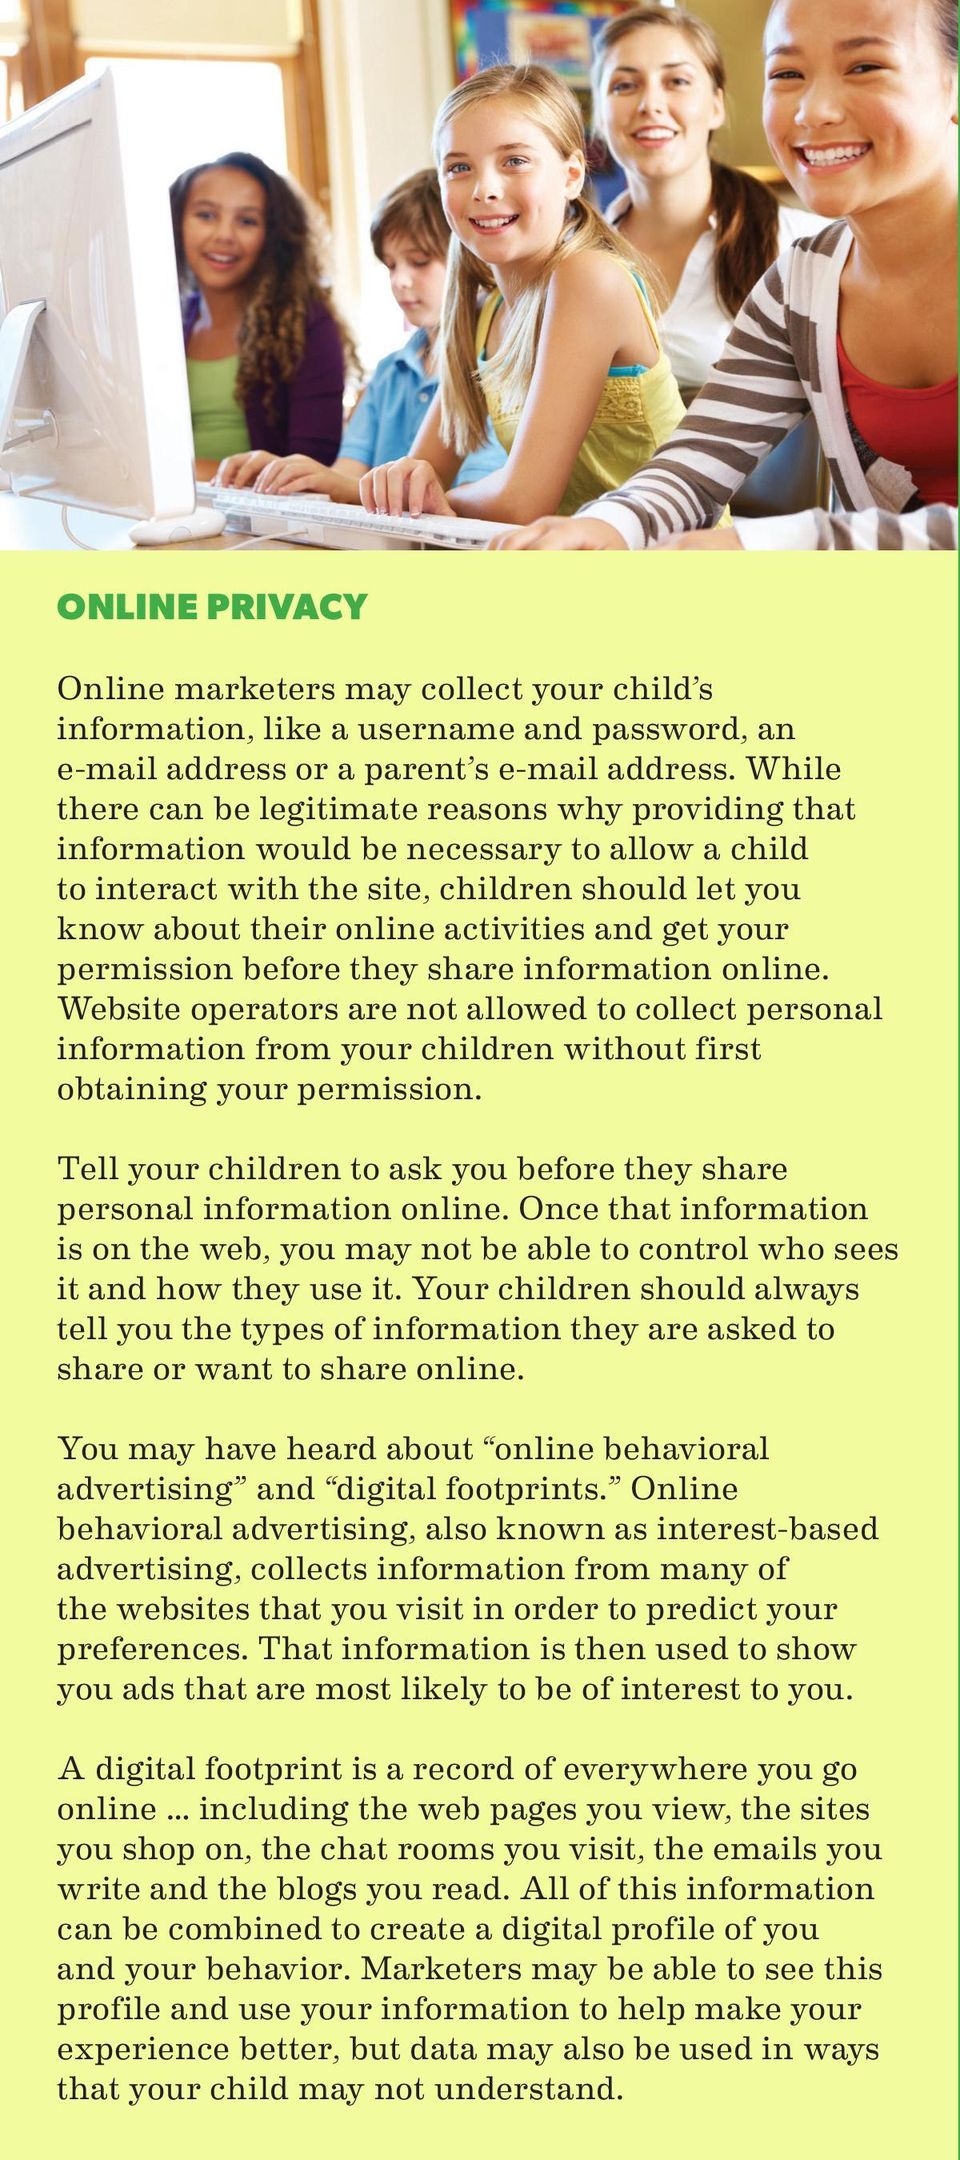 your permission before they share information online. Website operators are not allowed to collect personal information from your children without first obtaining your permission.